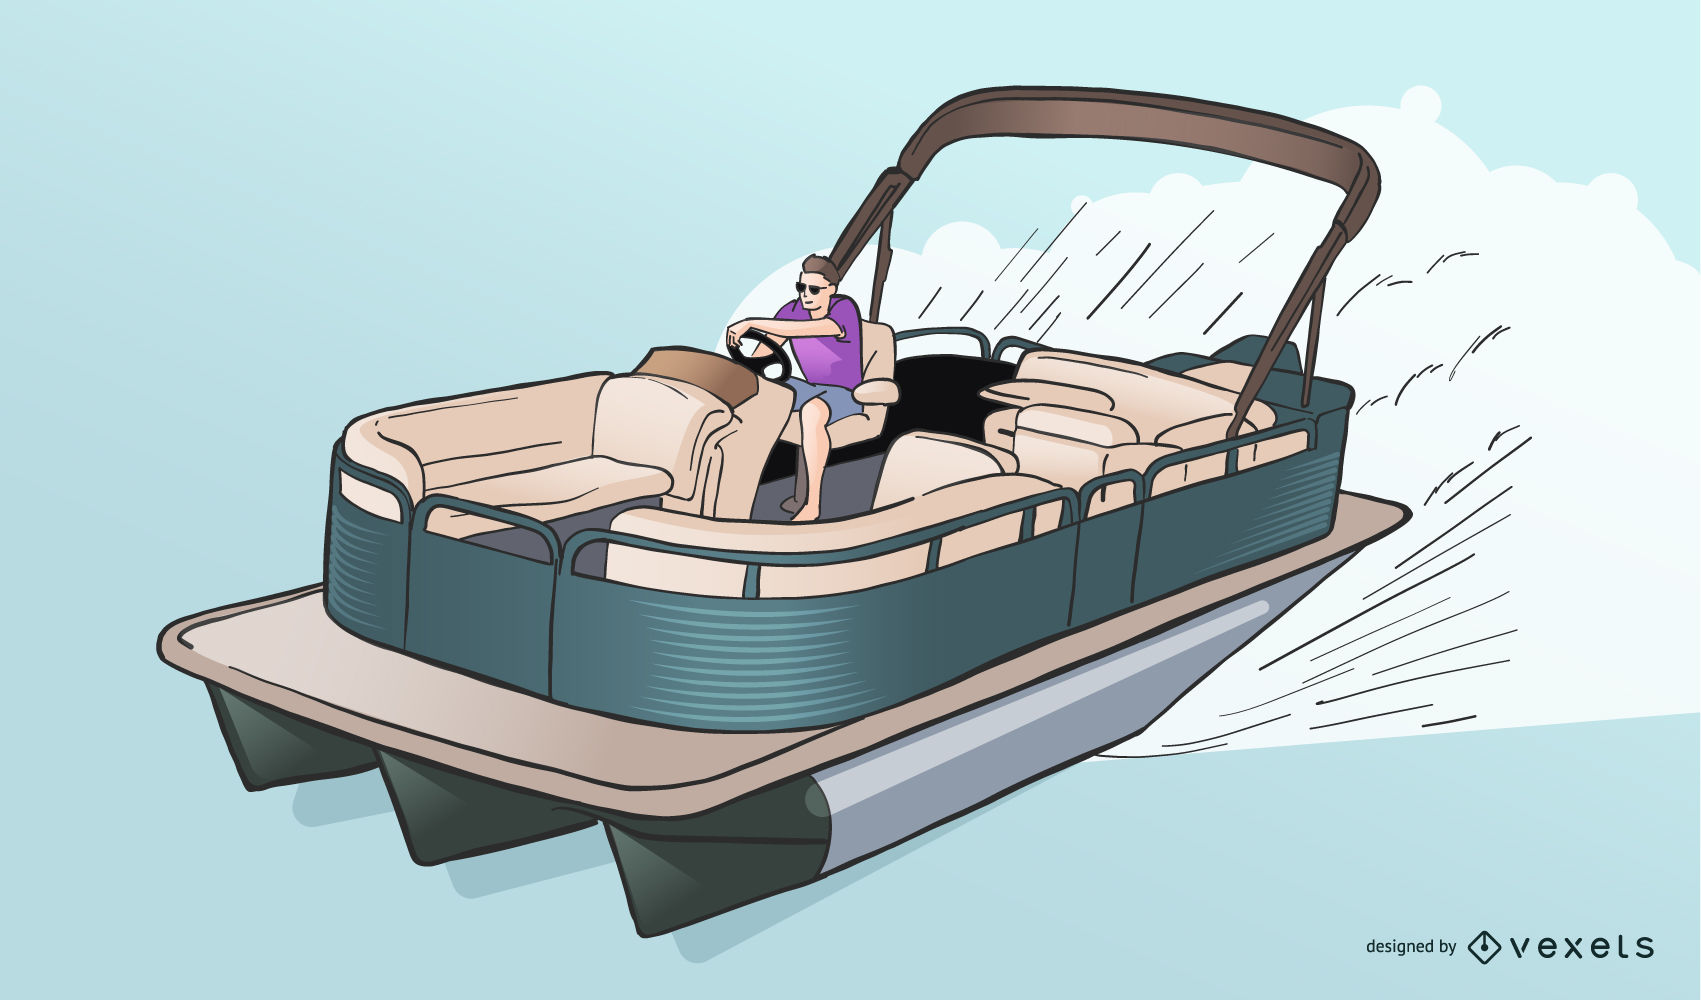 Vector Images for 'Pontoon'. 